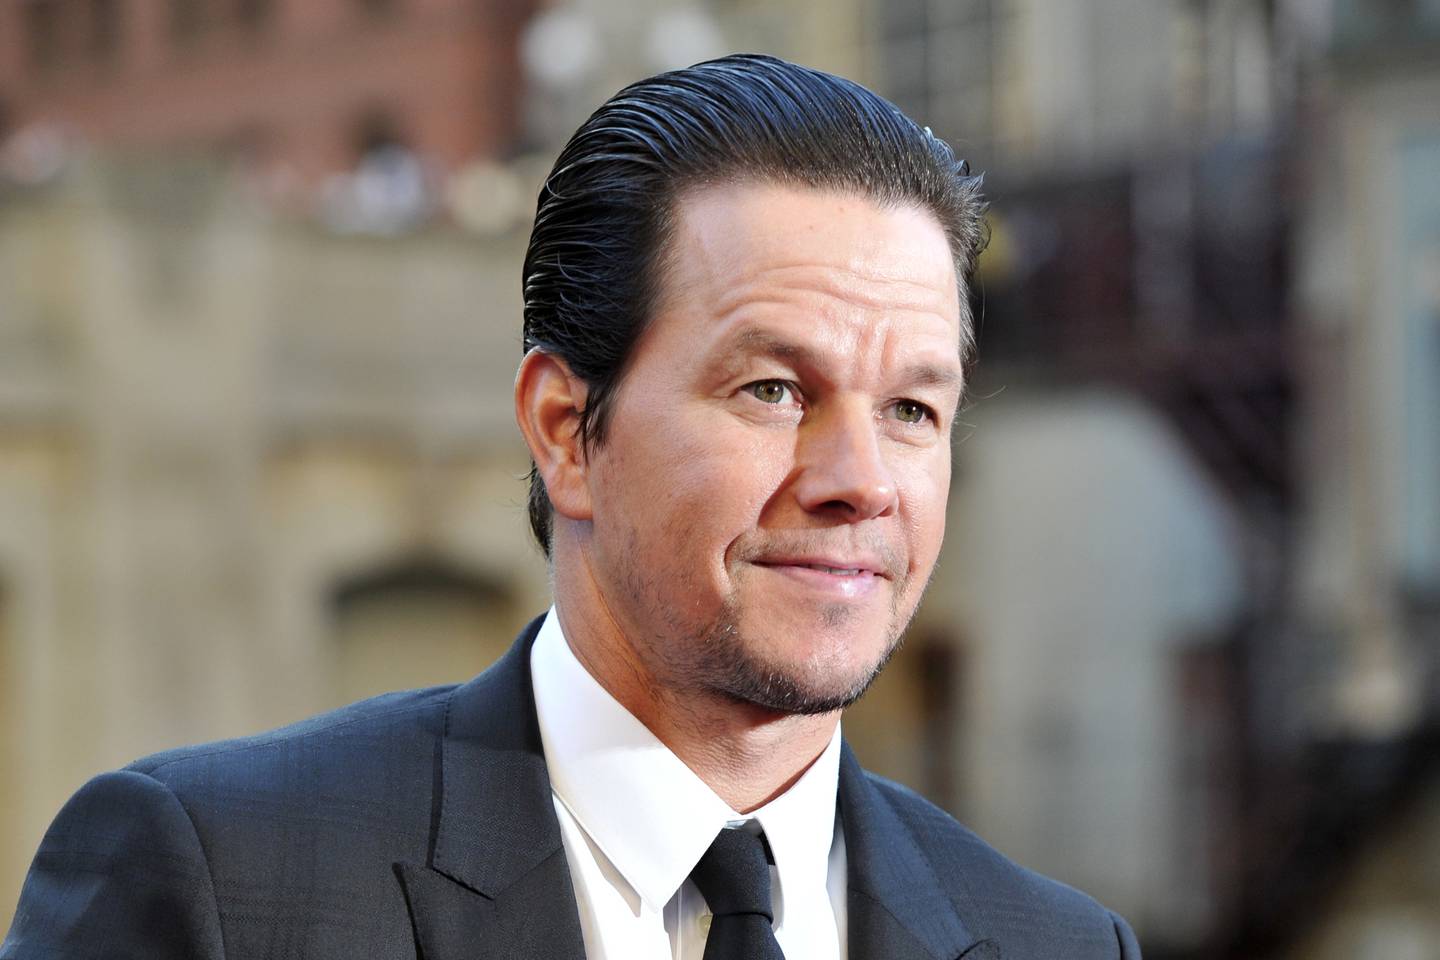 FILE - In this Tuesday, June 20, 2017 file photo,Mark Wahlberg attends the U.S. premiere of "Transformers: The Last Knight" at the Civic Opera House on in Chicago. Wahlberg outmuscled Dwayne Johnson to become Hollywoodâ€™s highest-paid actor in the past year with a transforming income of $68 million, according to Forbes magazine. The former rapper and underwear model known as Marky Mark beat out â€œBaywatchâ€ star Johnson with $65 million and The Rockâ€™s â€œThe Fate of the Furiousâ€ co-star Vin Diesel worth $54.5 million(Photo by Rob Grabowski/Invision/AP)